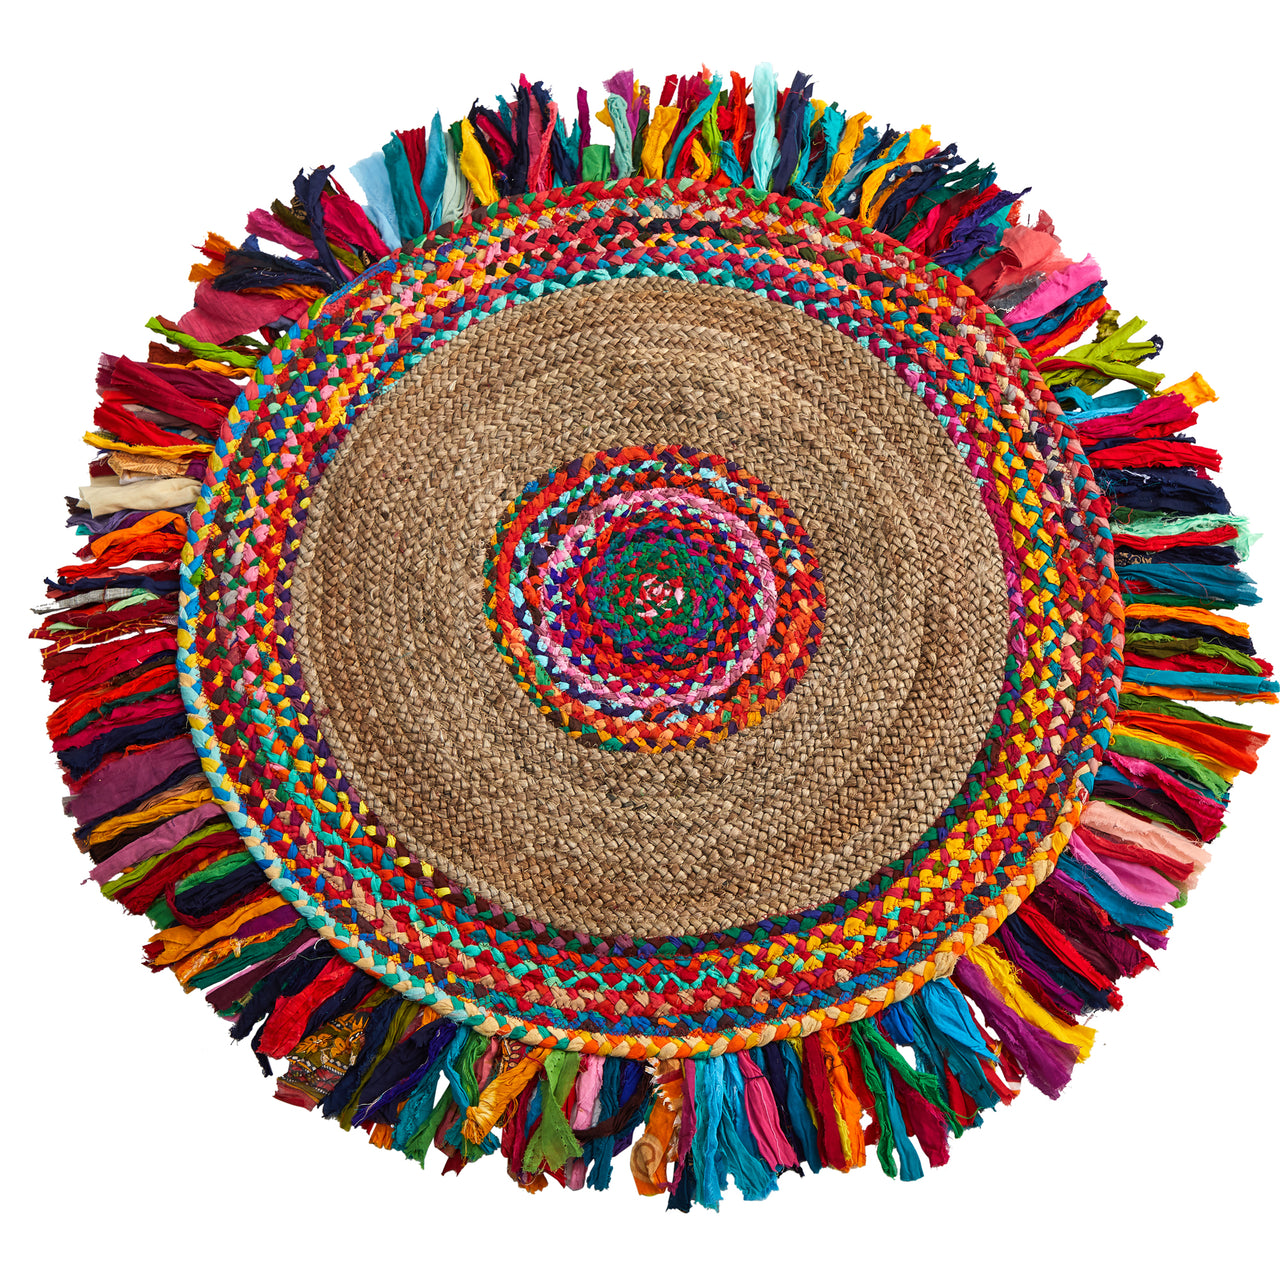 Handmade Woven Chindi Jute Braided Rug With Colorful Fringe 3' - Nearly Natural